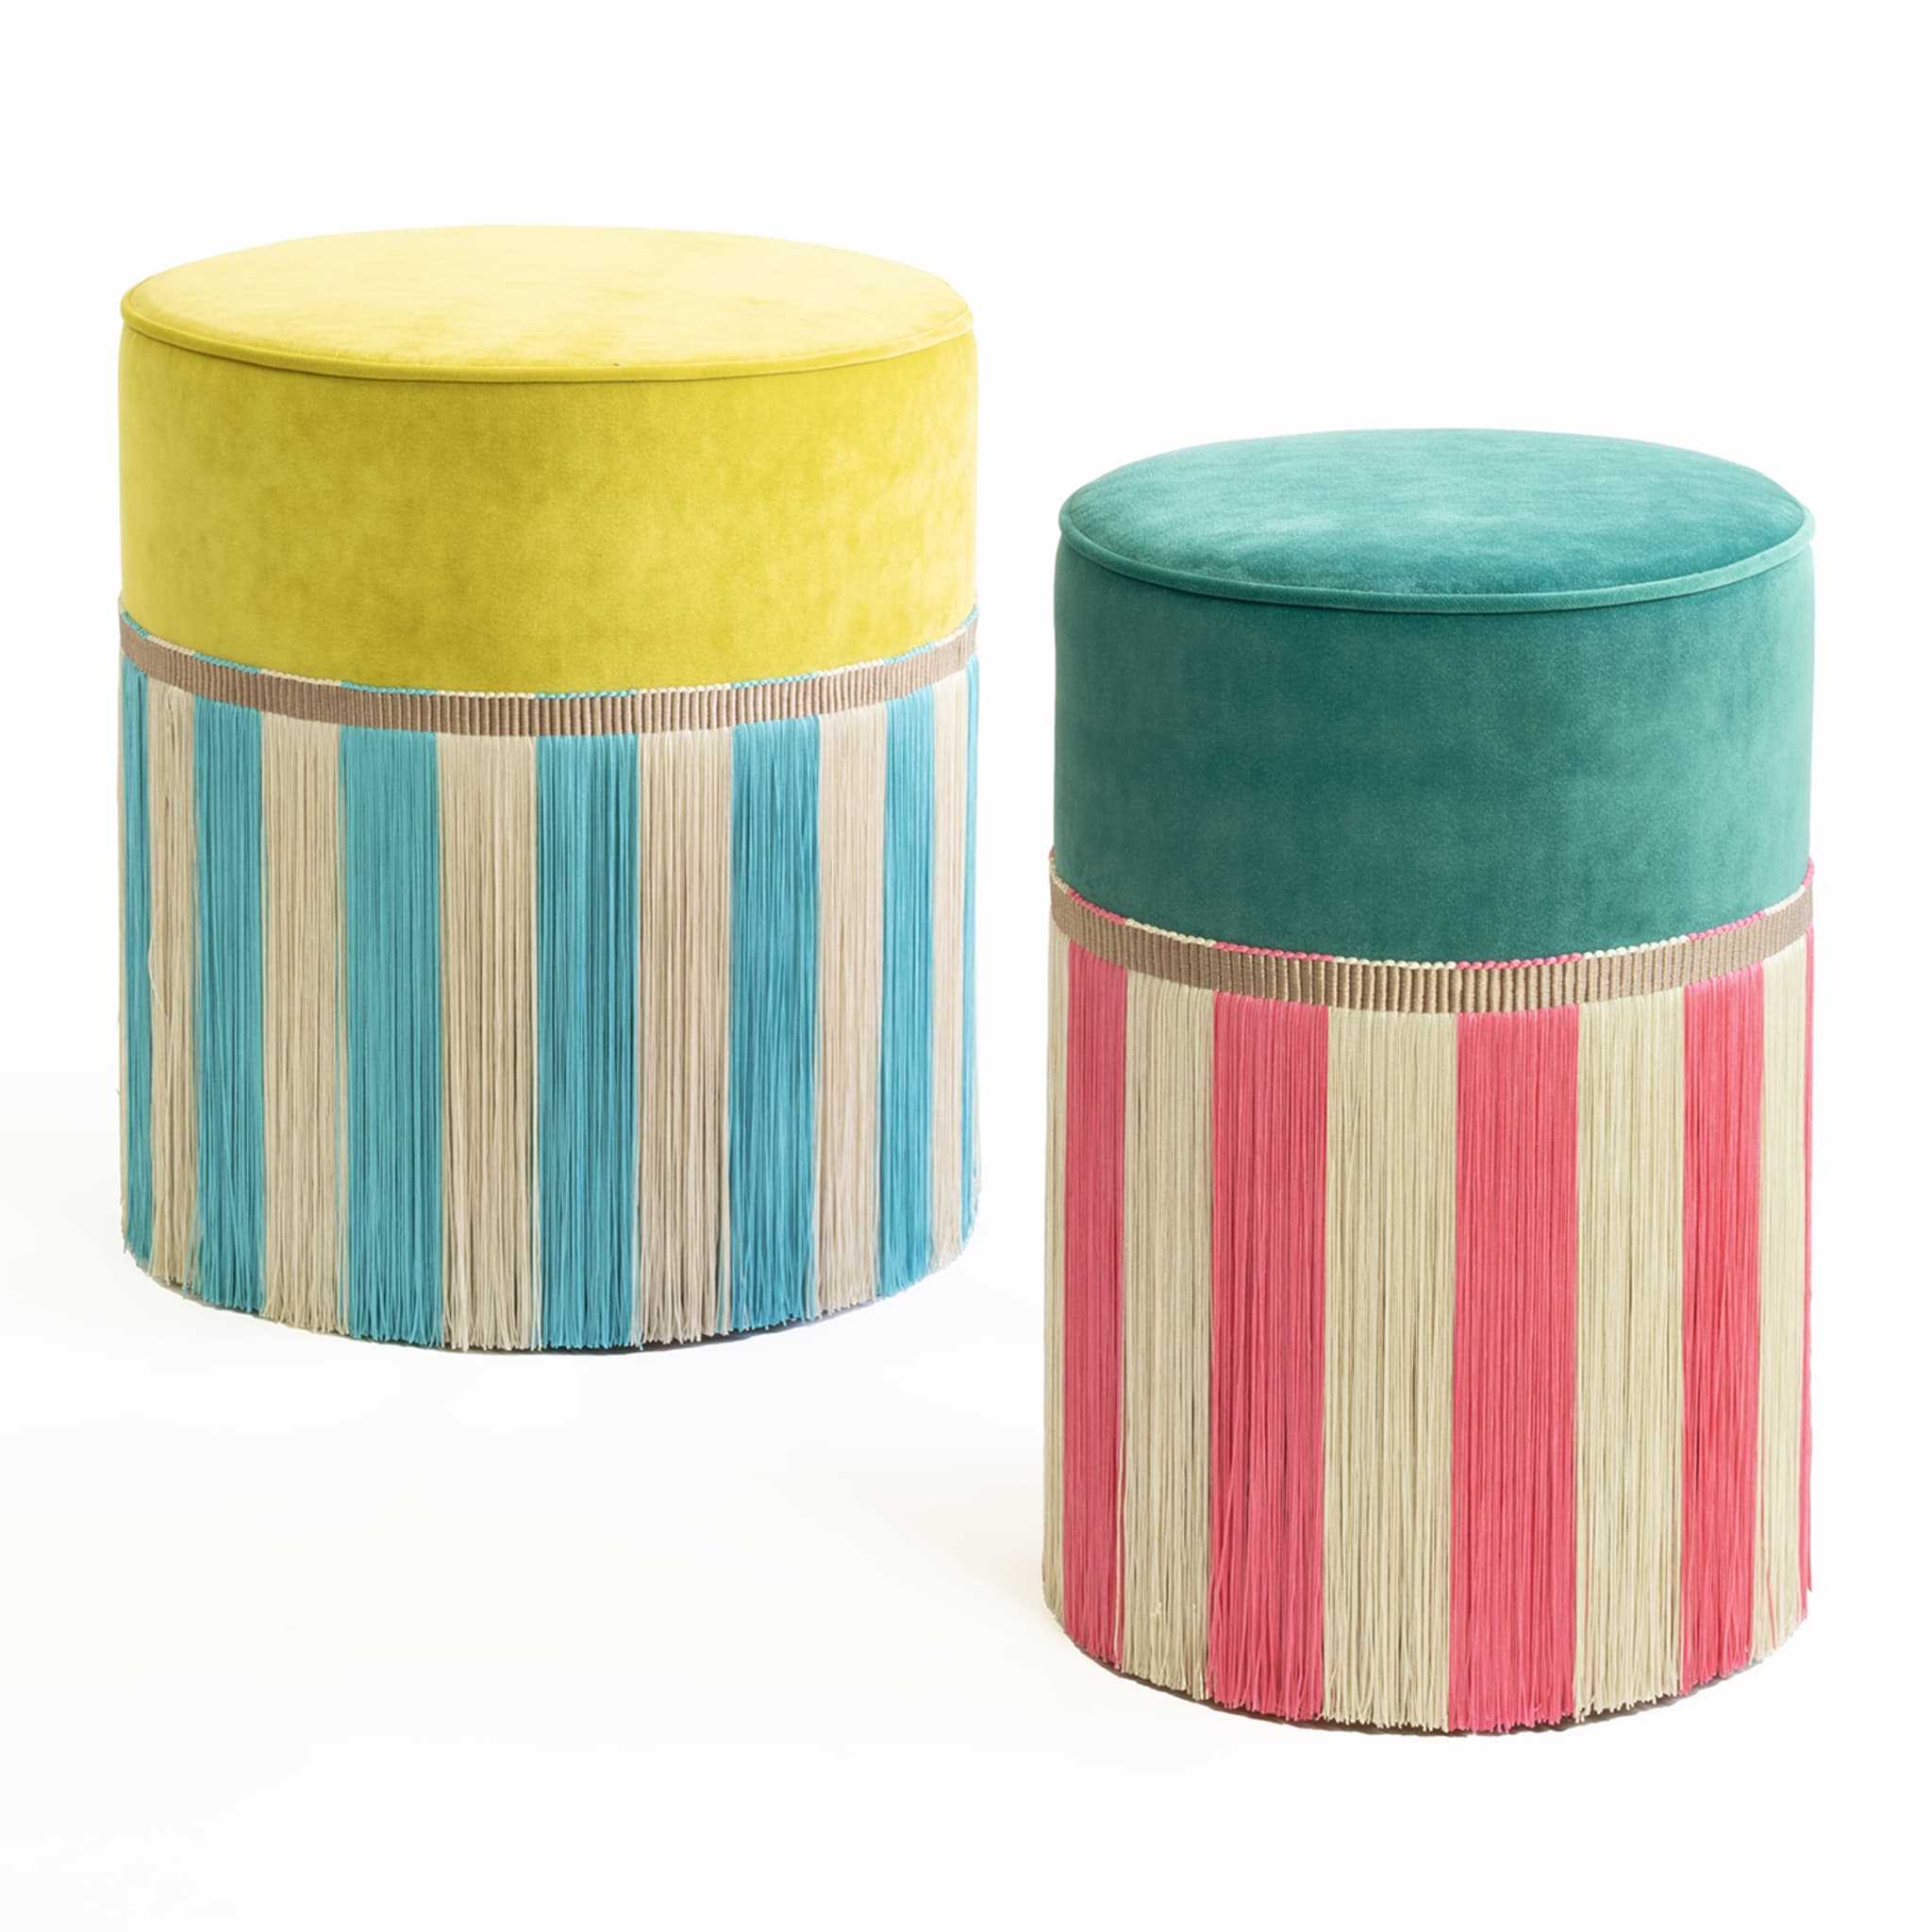 Couture Geometric Riga Small Turquoise & Pink Ottoman - Alternative view 1